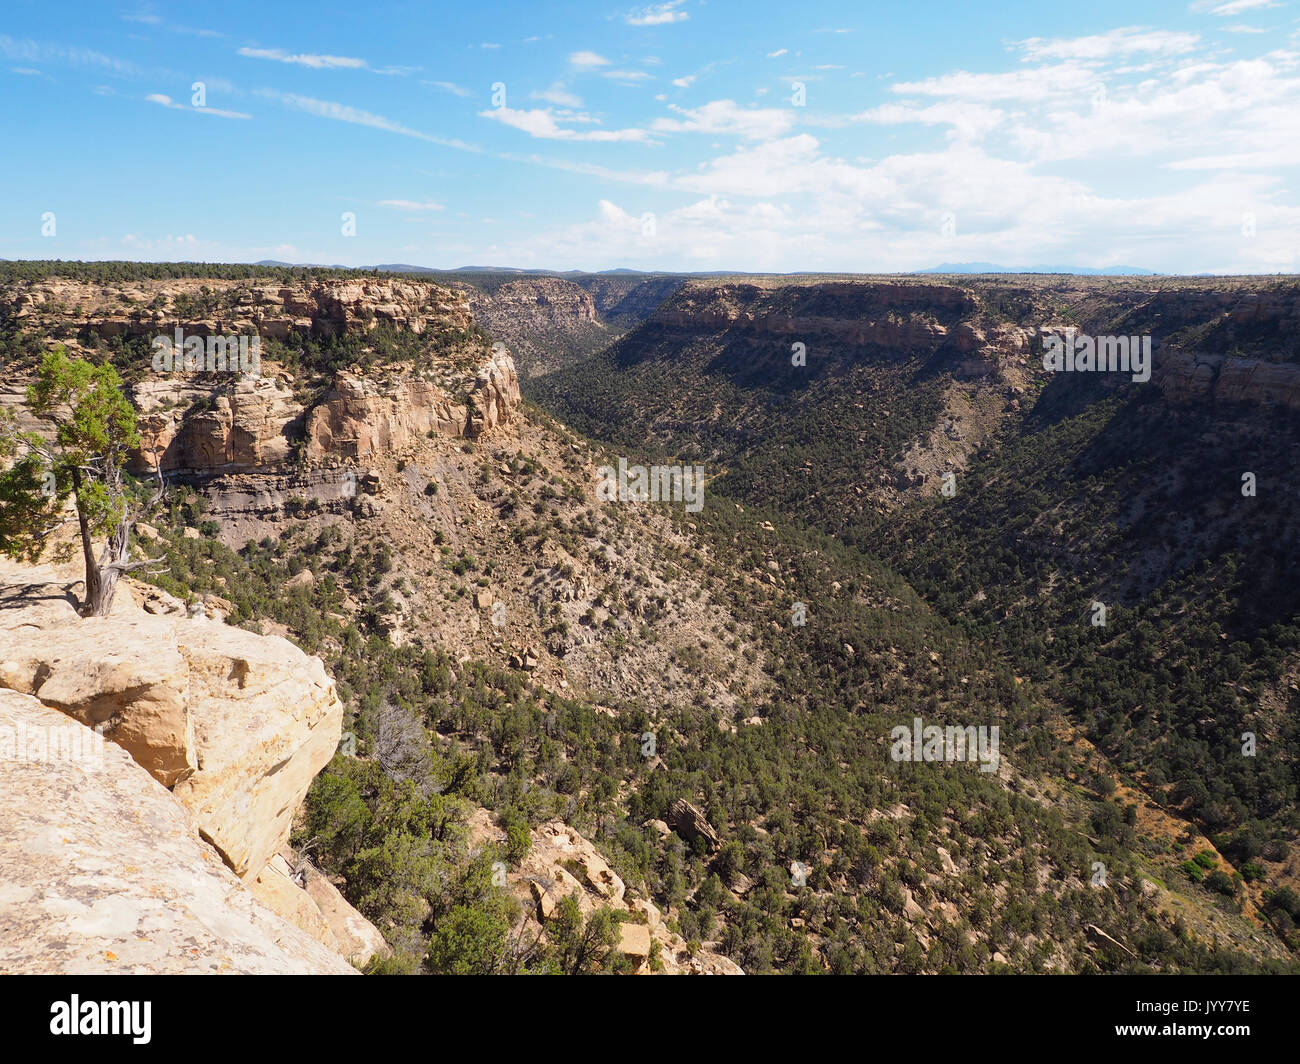 Scenic view from the Mesa Verde elevated plateau across the Mesa Verde tableland and canyon. Stock Photo